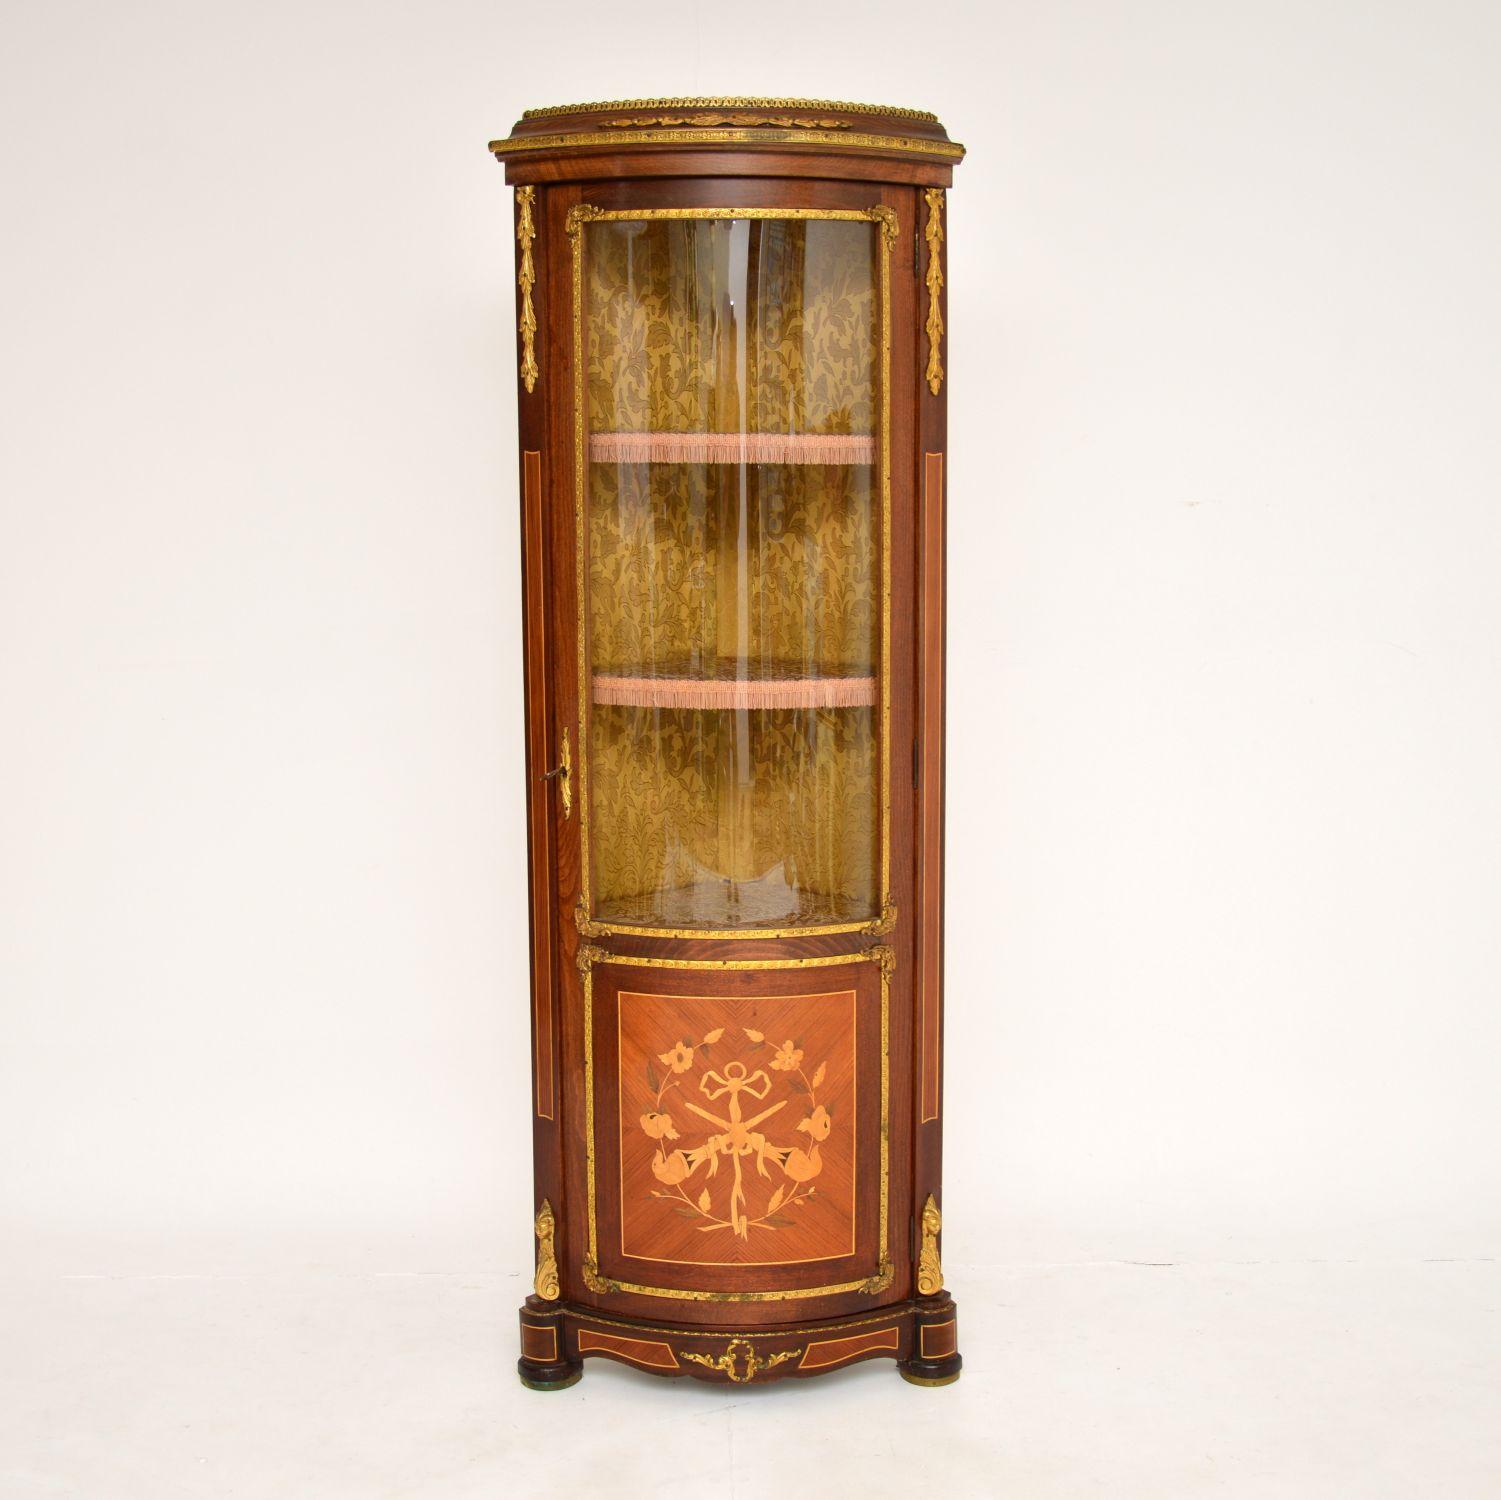 A beautiful antique French corner cabinet with stunning marquetry and gilt bronze mounts, which I would date from around the 1930-50’s period.

This is a lovely compact size and is extremely well made. The gilt bronze mounts are of amazing